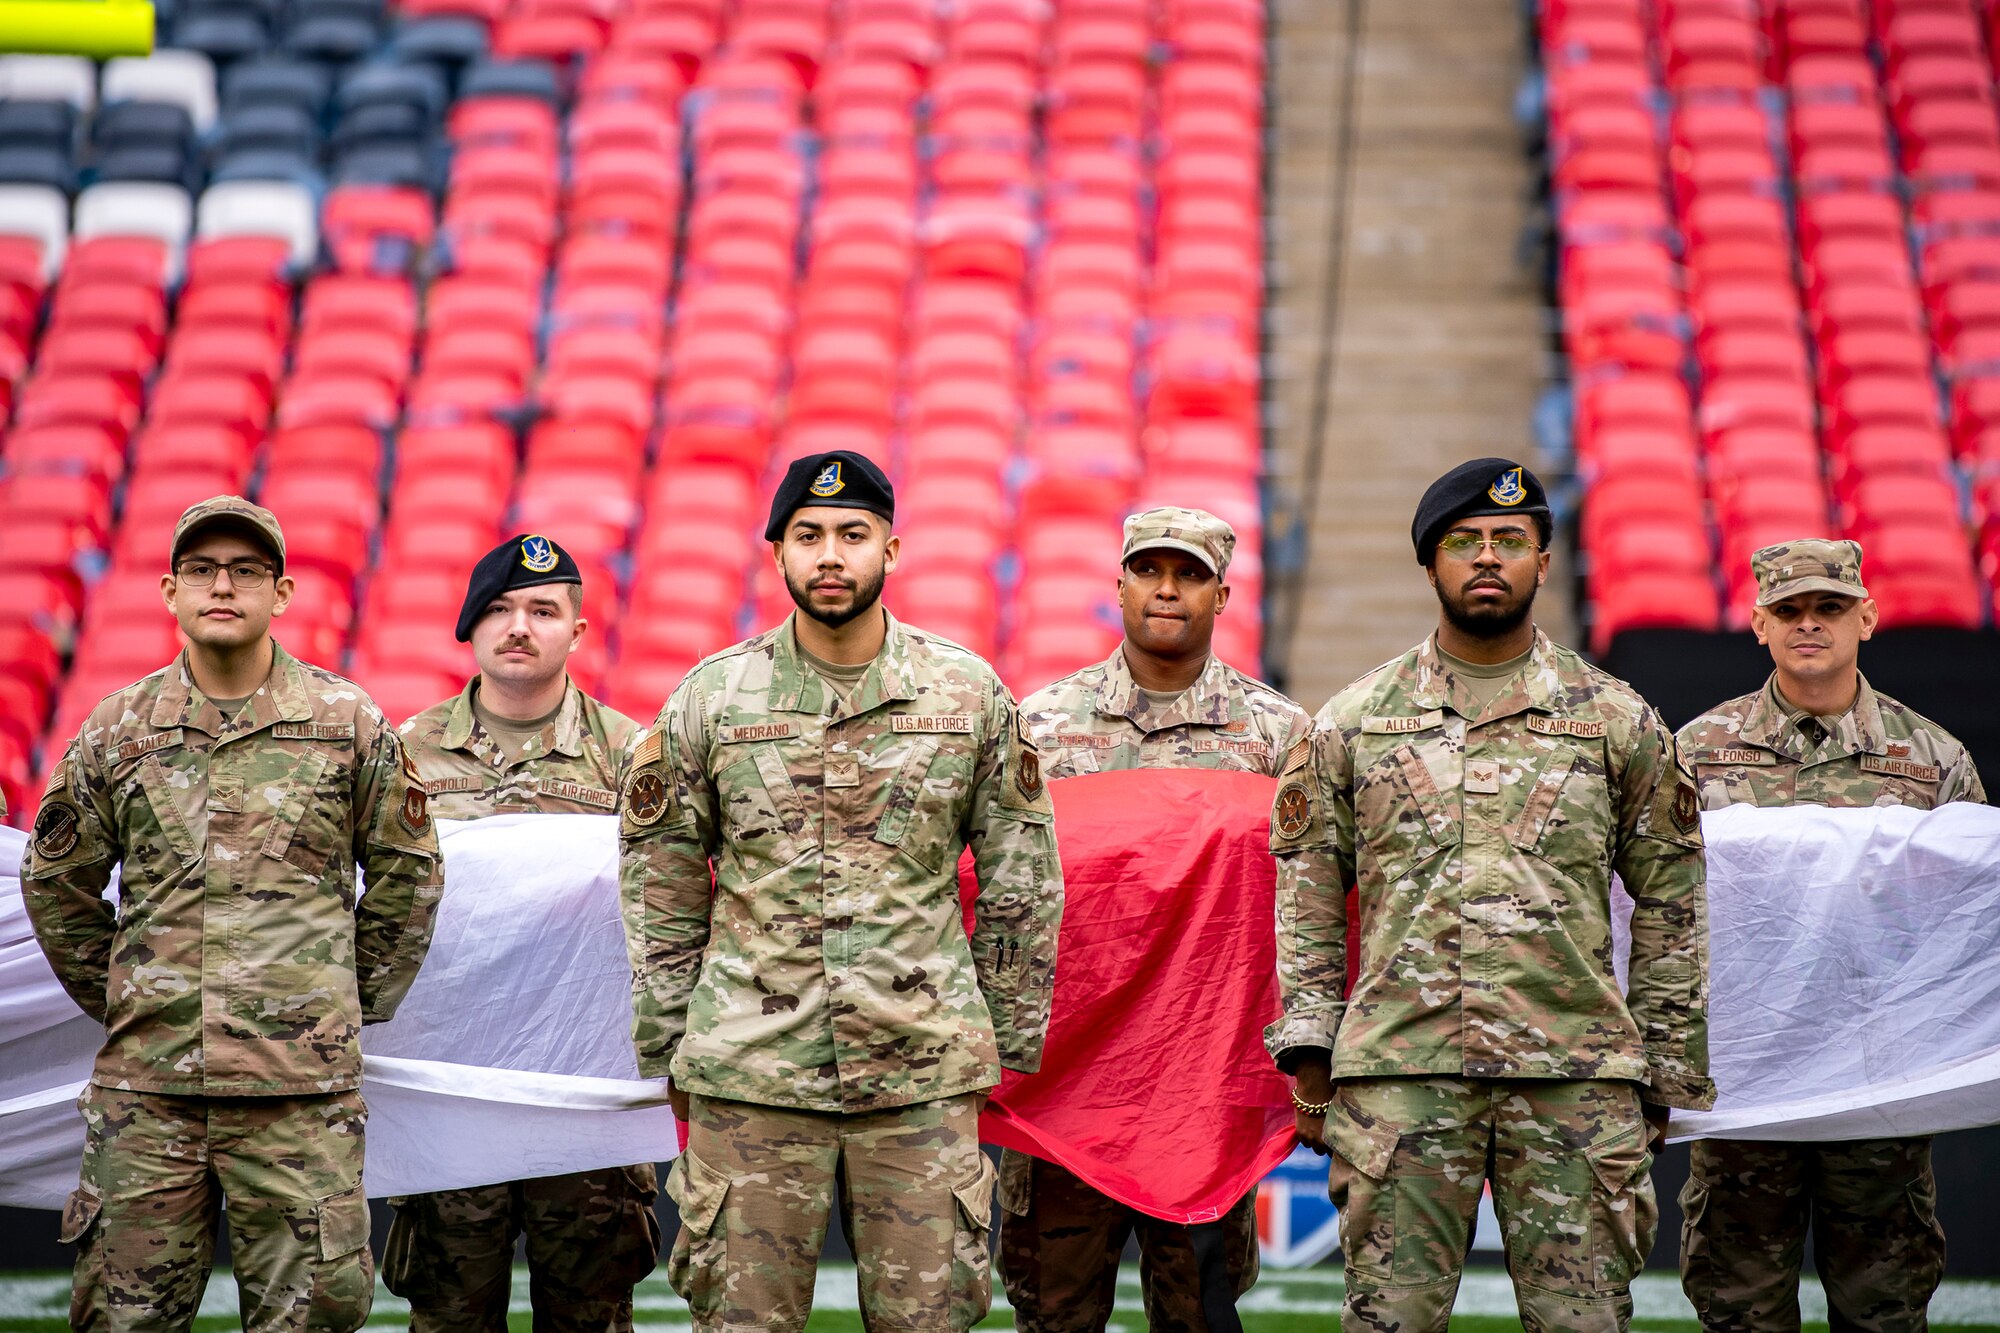 Airmen from the  501st Combat Support Wing stand at attention during a national anthem rehearsal at Wembley Stadium, in London, England, Oct. 30, 2022. Approximately 70 uniformed personnel represented the U.S. Air Force and nation by unveiling an American flag during the pre-game ceremonies of the Jacksonville Jaguars and Denver Broncos NFL game. (U.S. Air Force photo by Staff Sgt. Eugene Oliver)